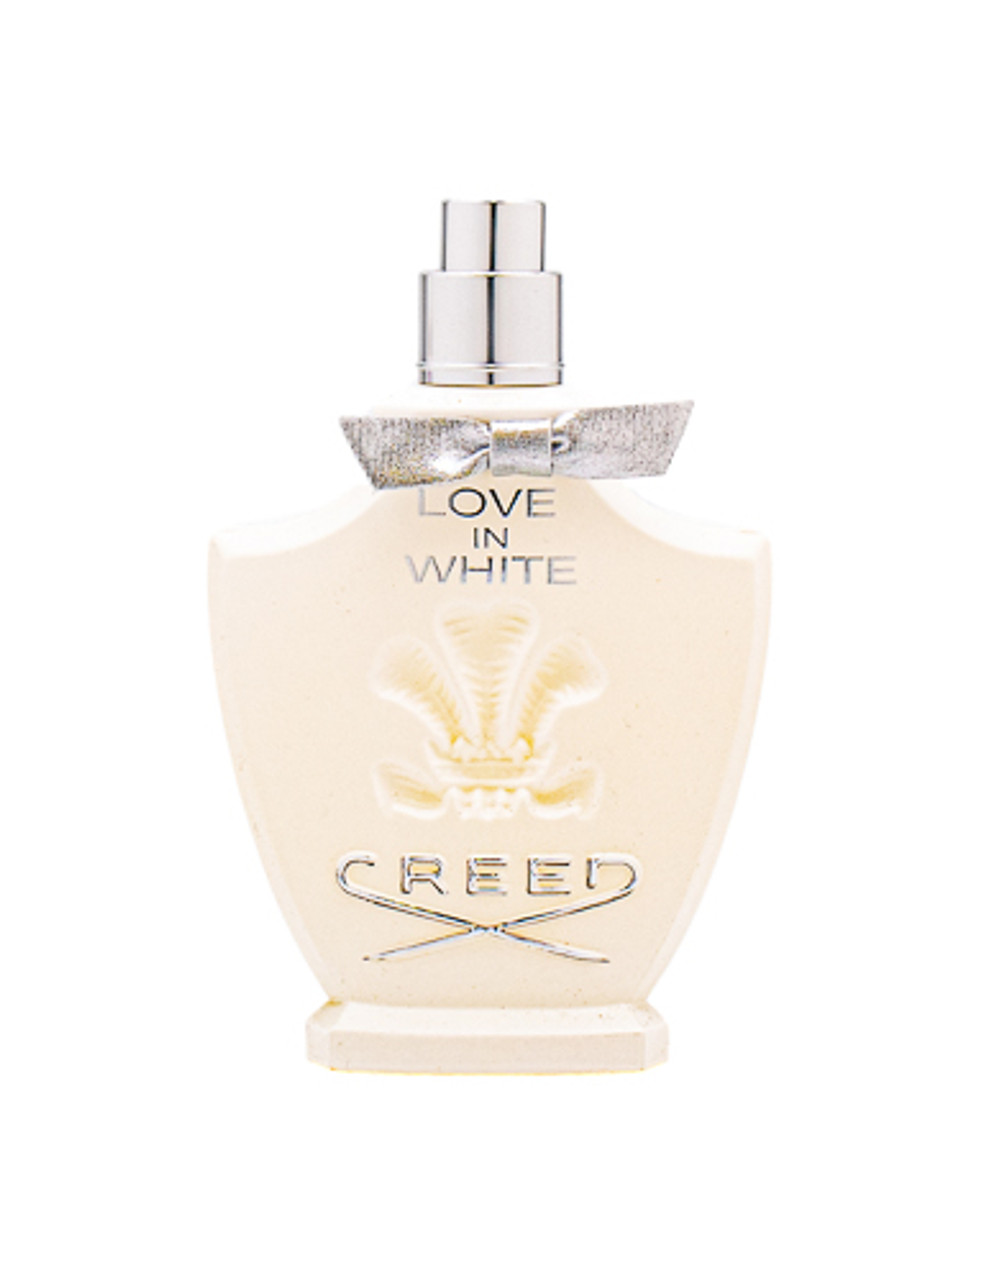 Creed in oz Tester women White Creed EDP for by Love 2.5 ForeverLux -